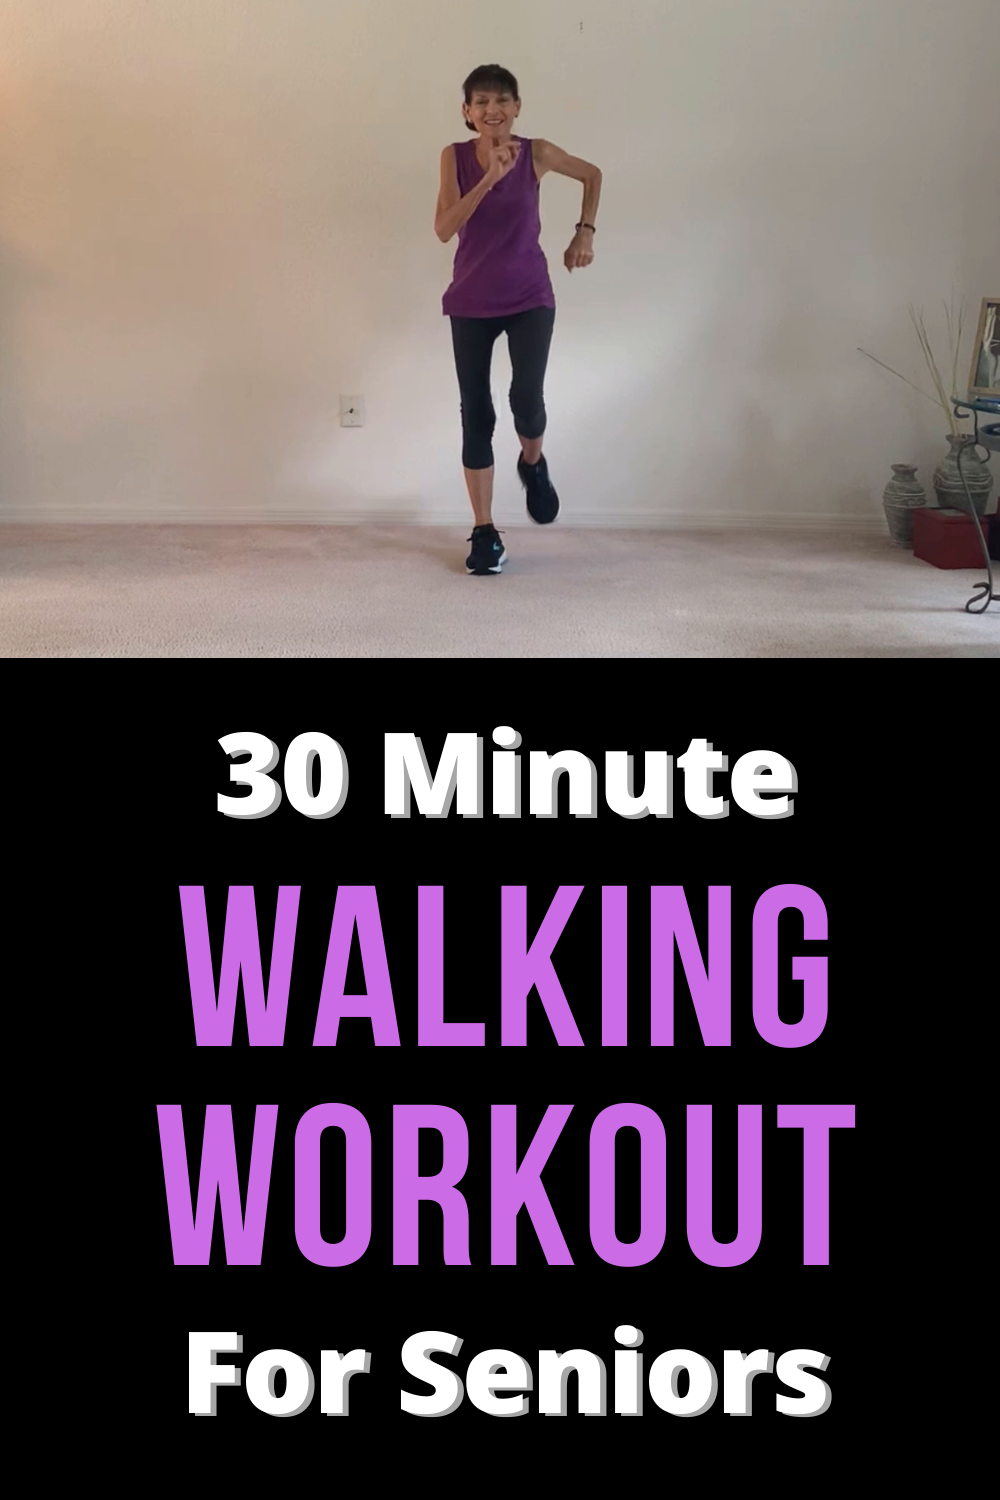 guided walking workout 30 minutes